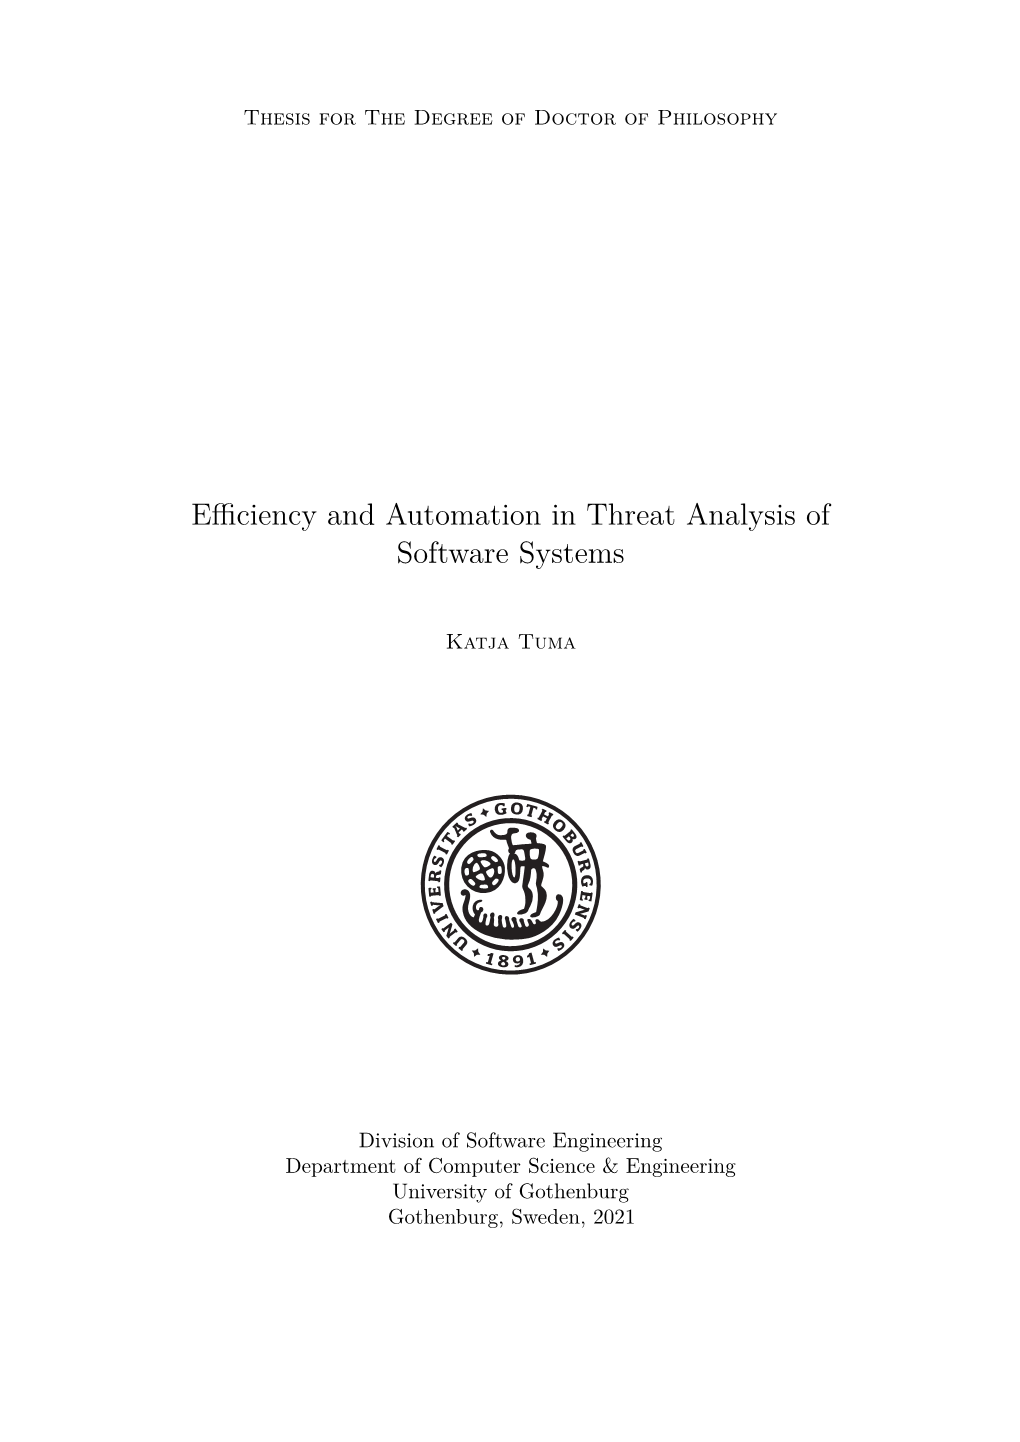 Efficiency and Automation in Threat Analysis of Software Systems